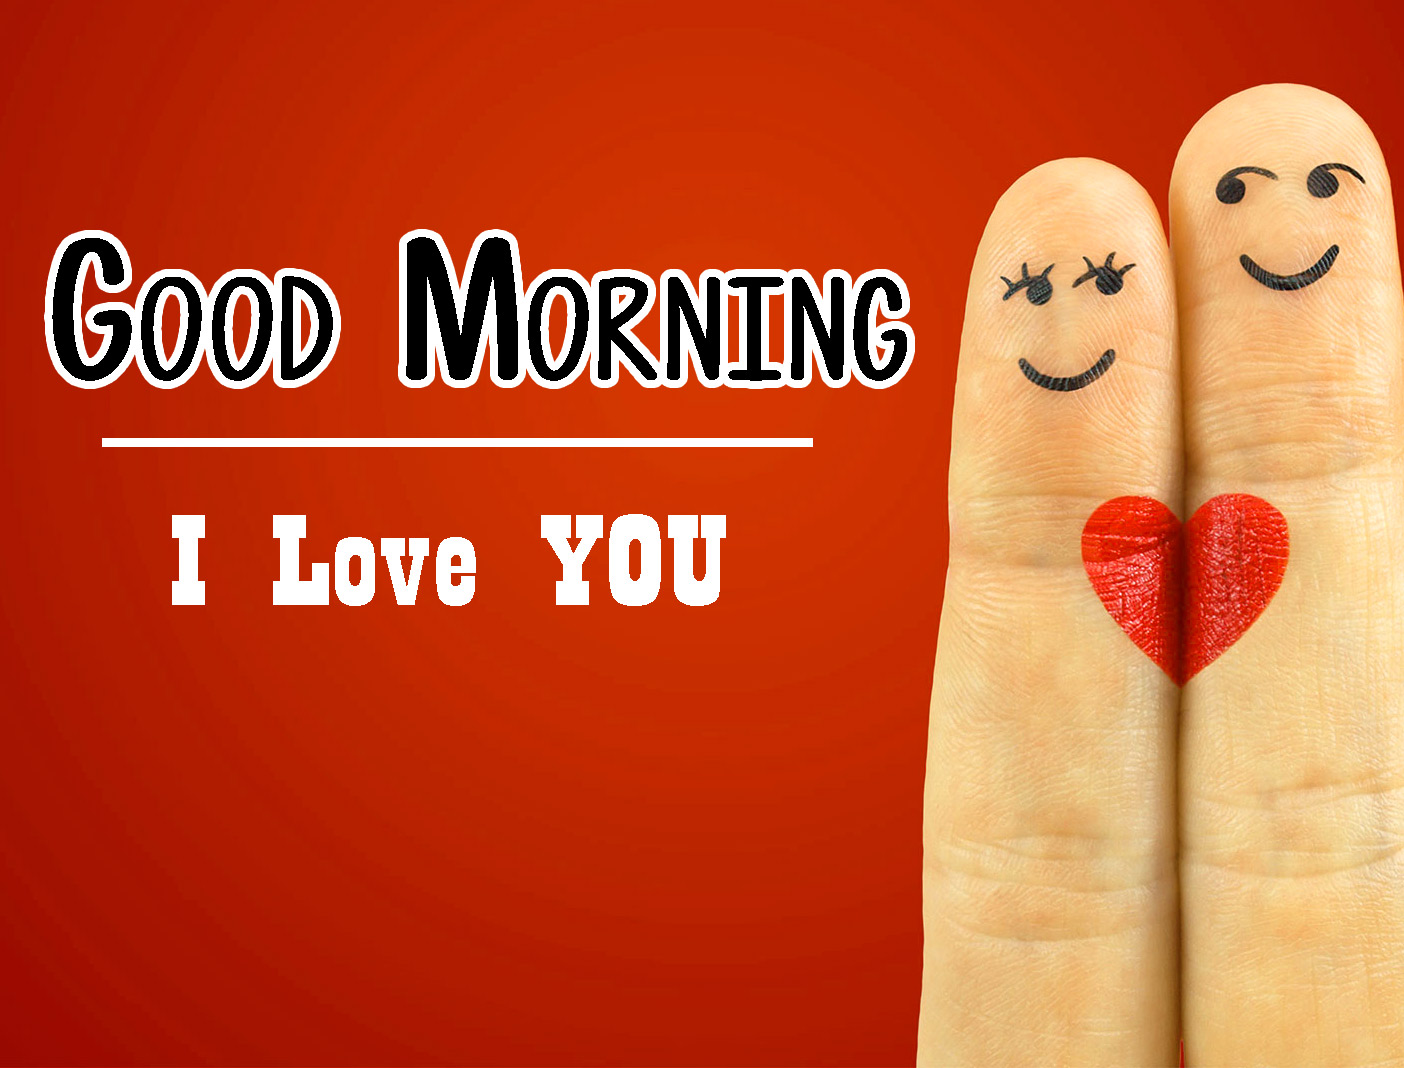 Free Love Good Morning Wishes Wallpaper Download 